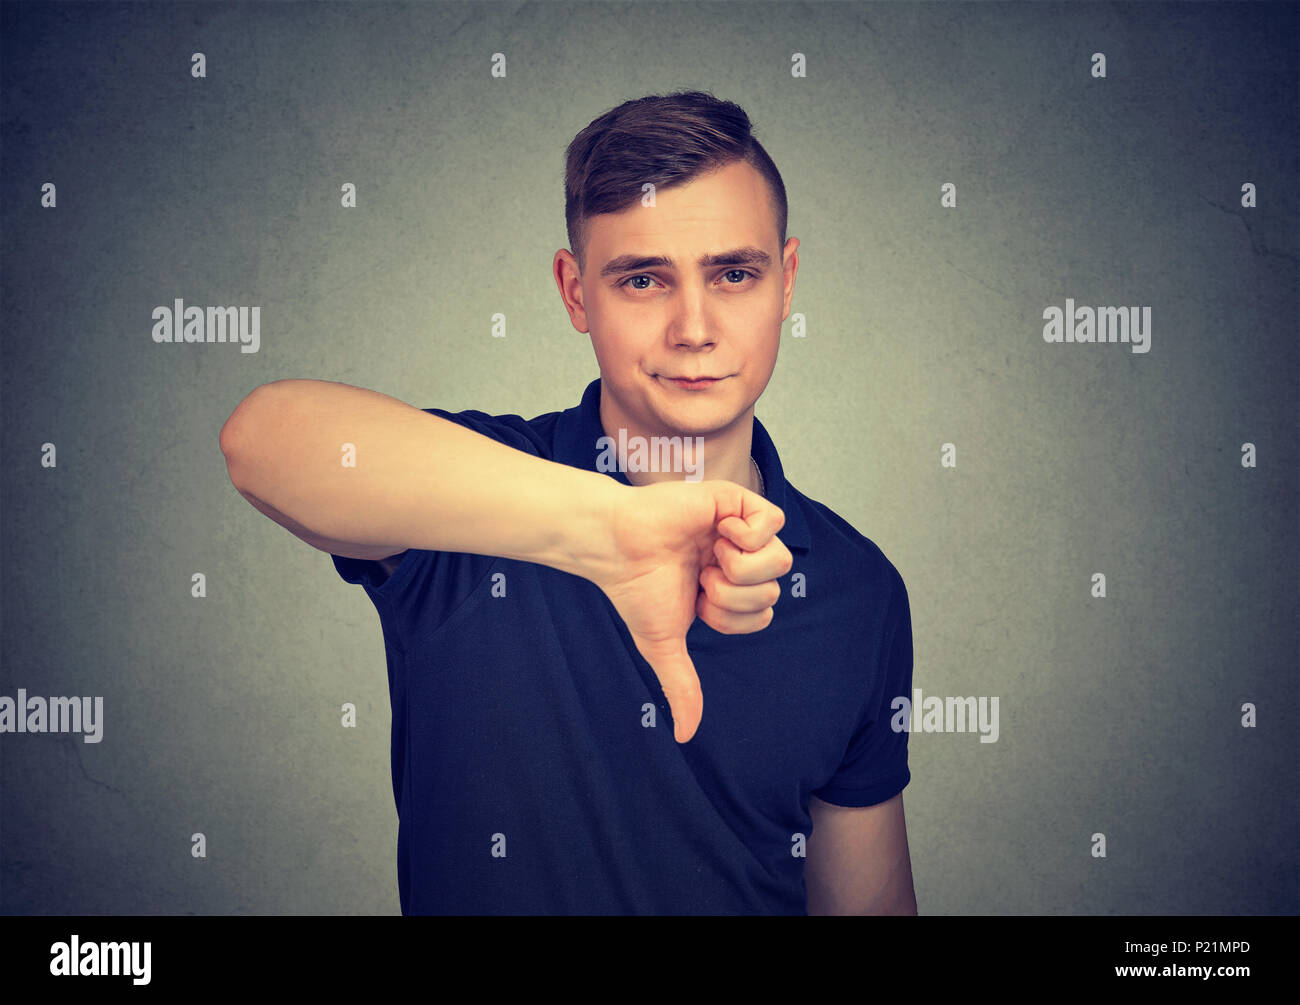 man showing thumb down hand gesture Stock Photo